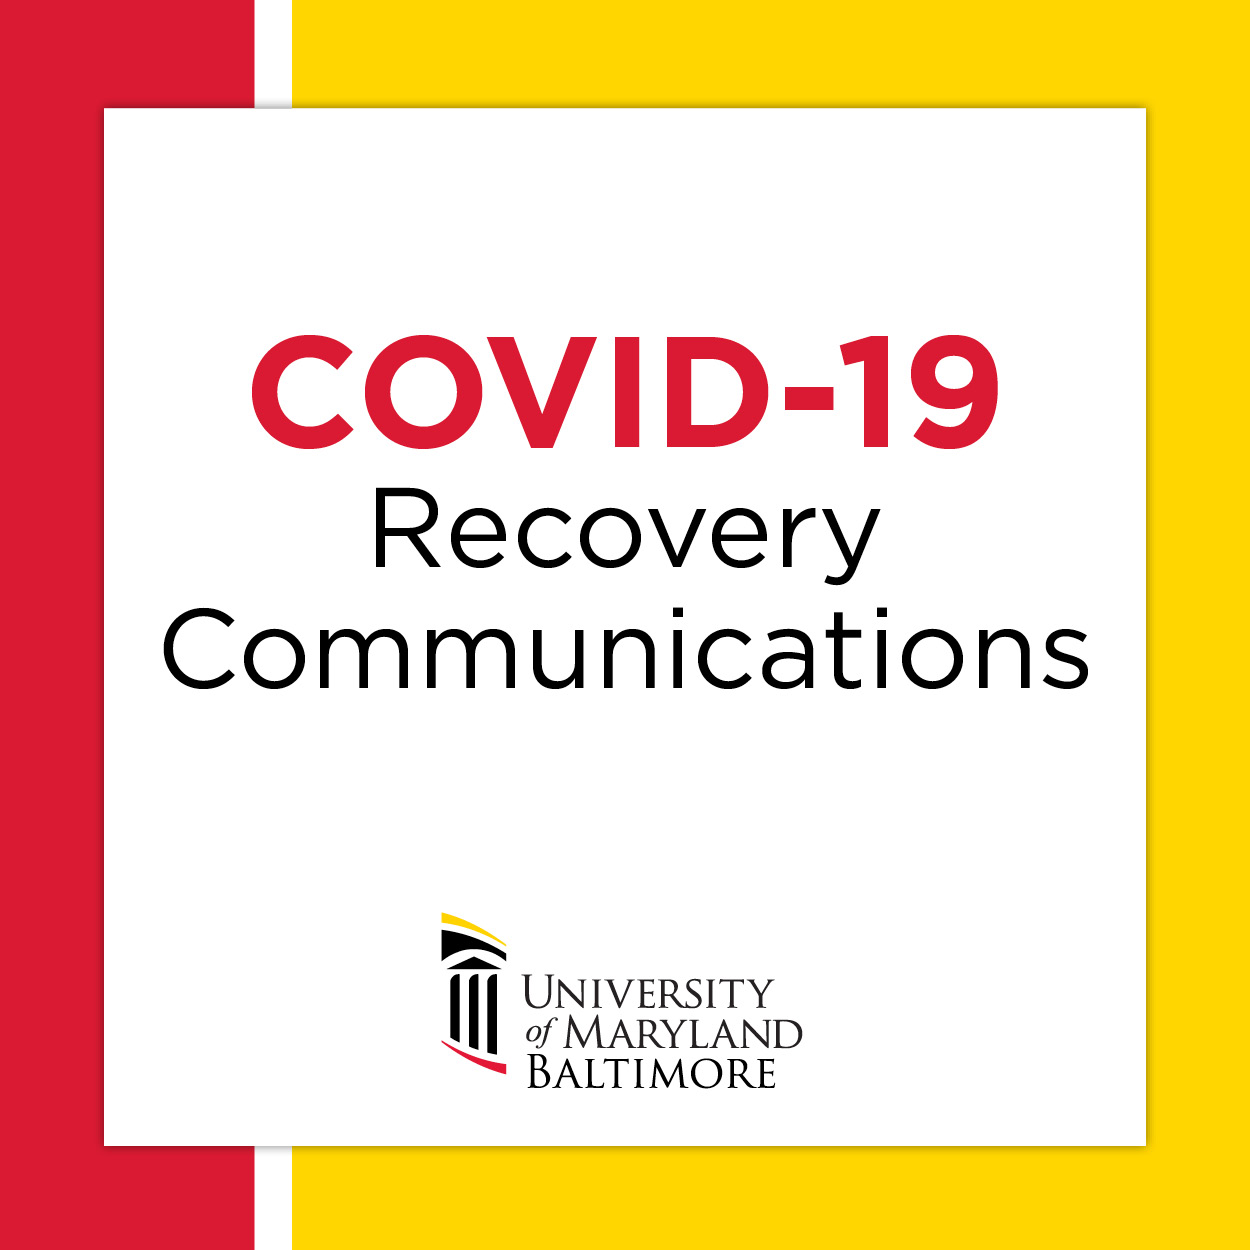 COVID-19 Recovery Communications